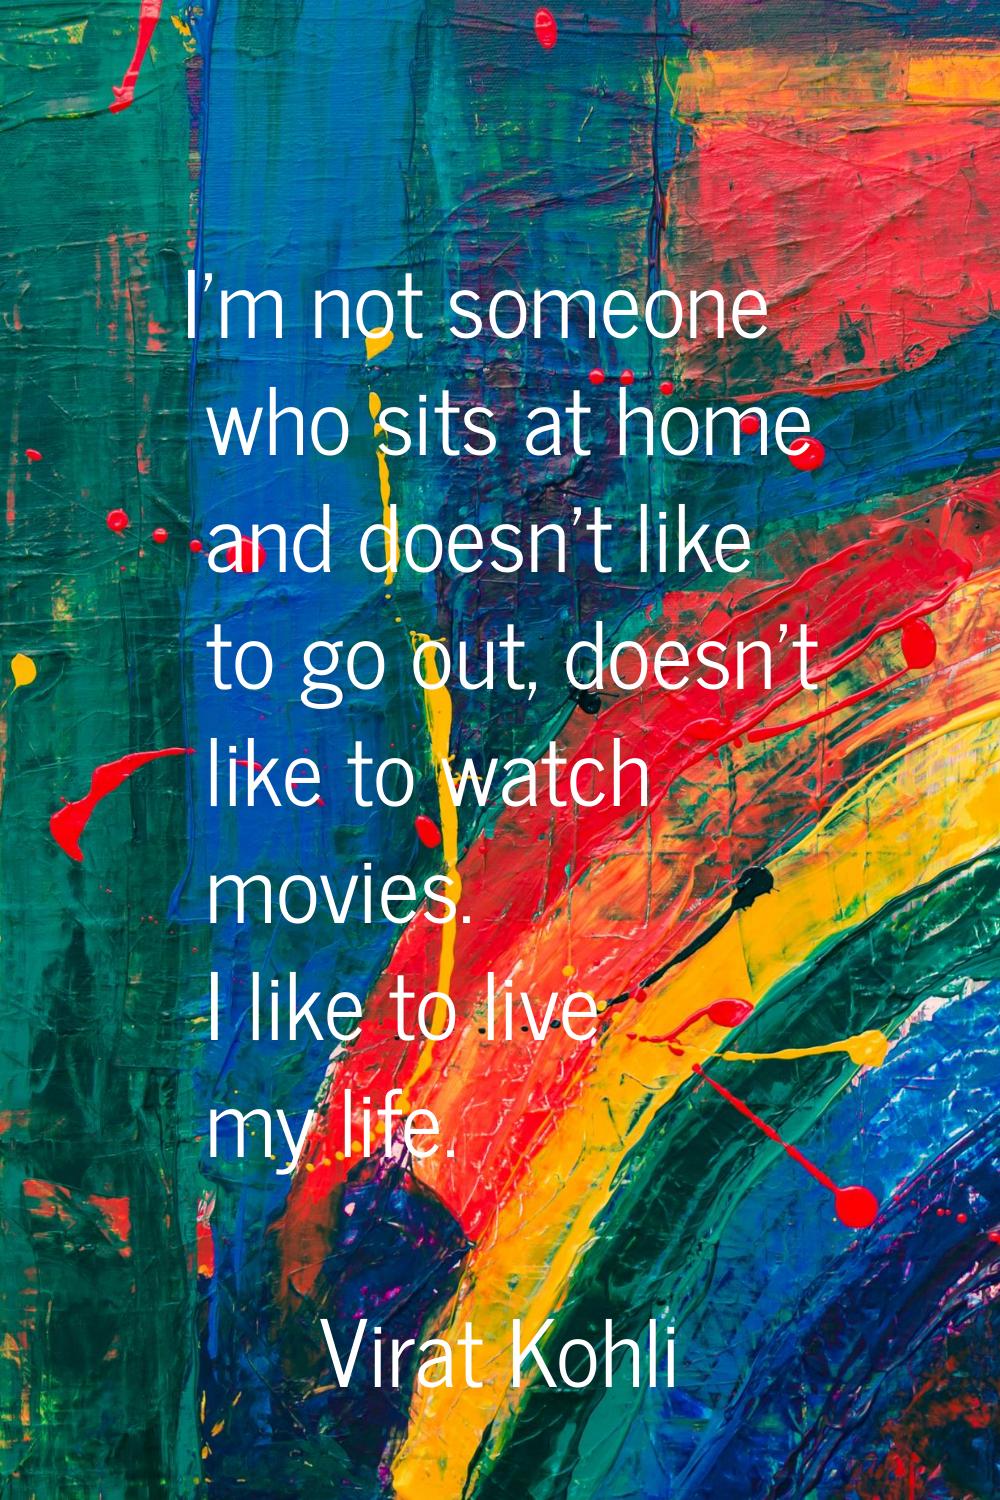 I'm not someone who sits at home and doesn't like to go out, doesn't like to watch movies. I like t